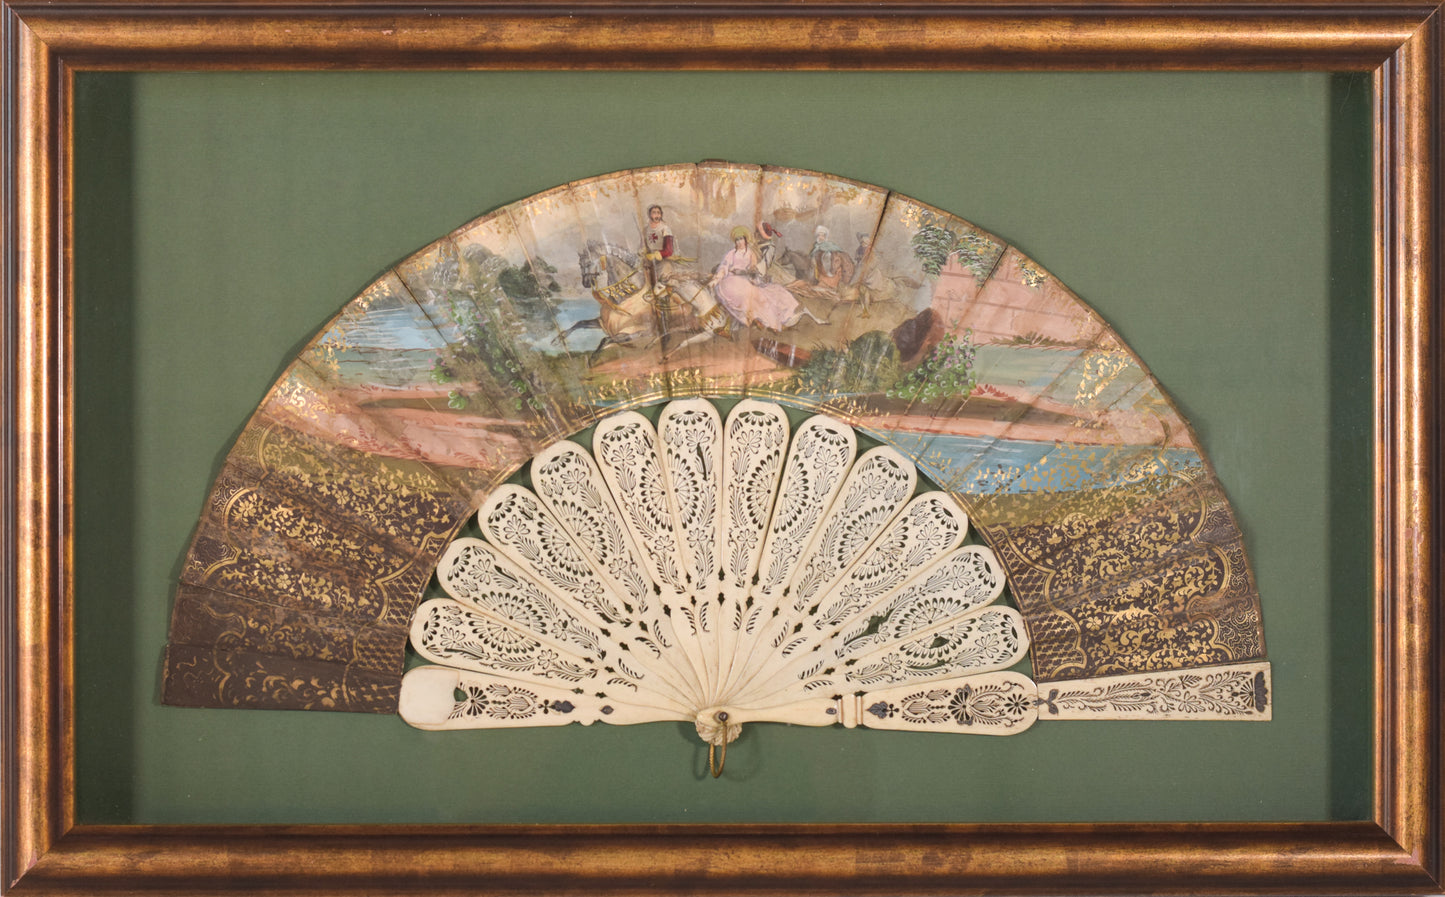 Framed Fan with Hand Painted Medieval Scene